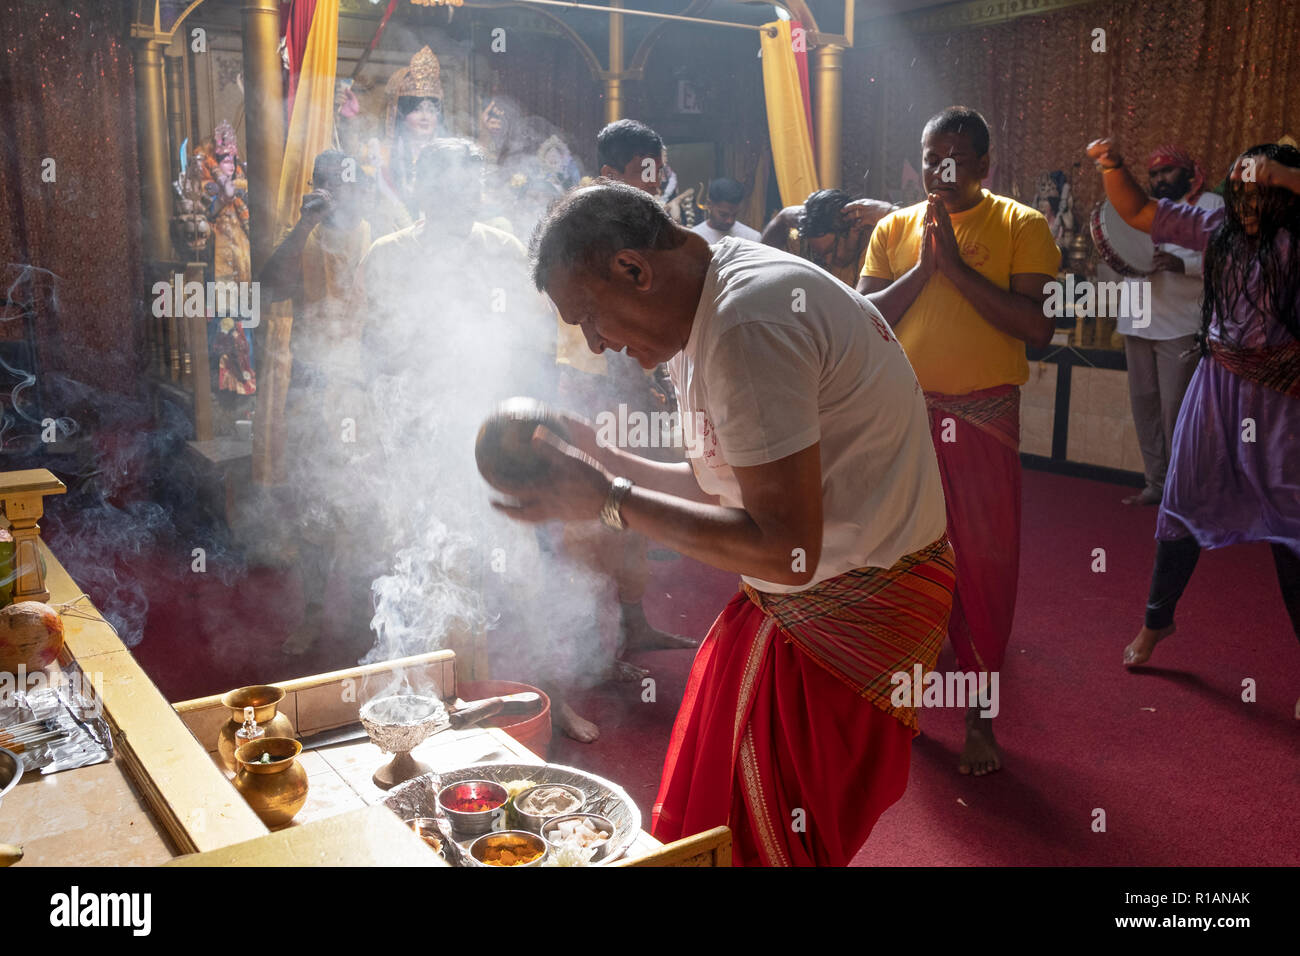 A Hindu devotee  makes a food offering to the goddess Kali at a Shakti Hindu temple in Queens, New York City. Stock Photo